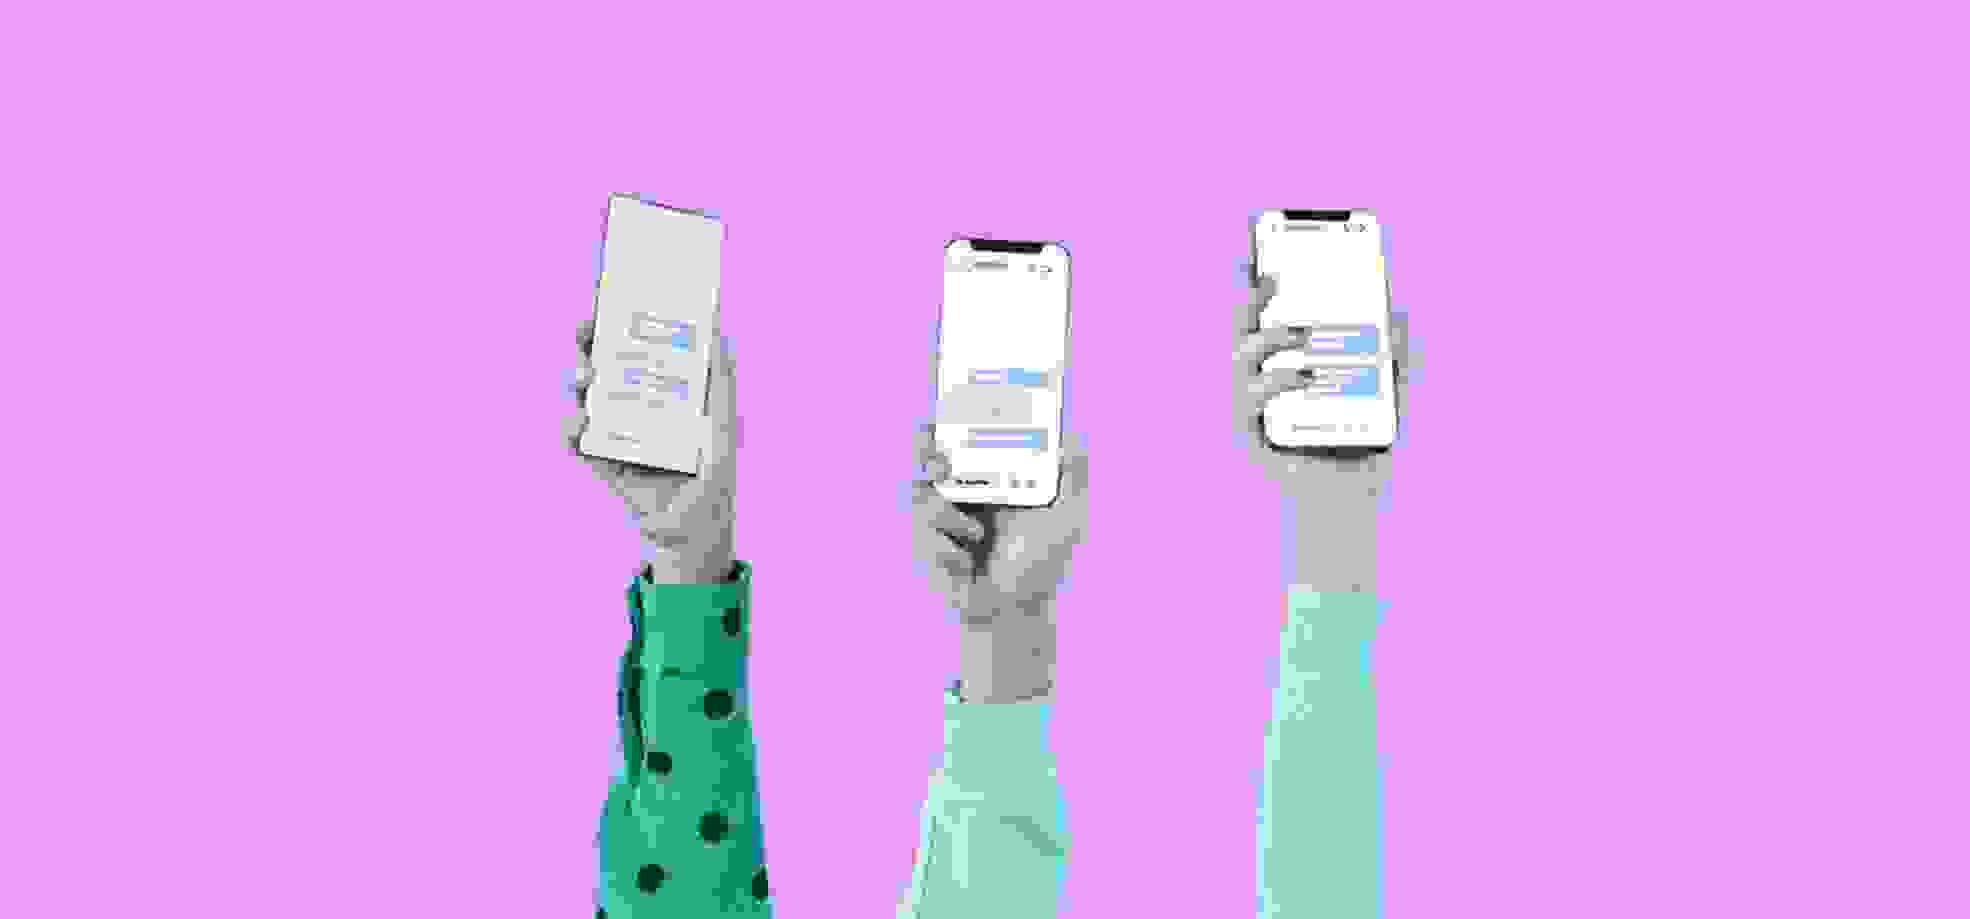 three hands holding mobile phones with messages on the screen